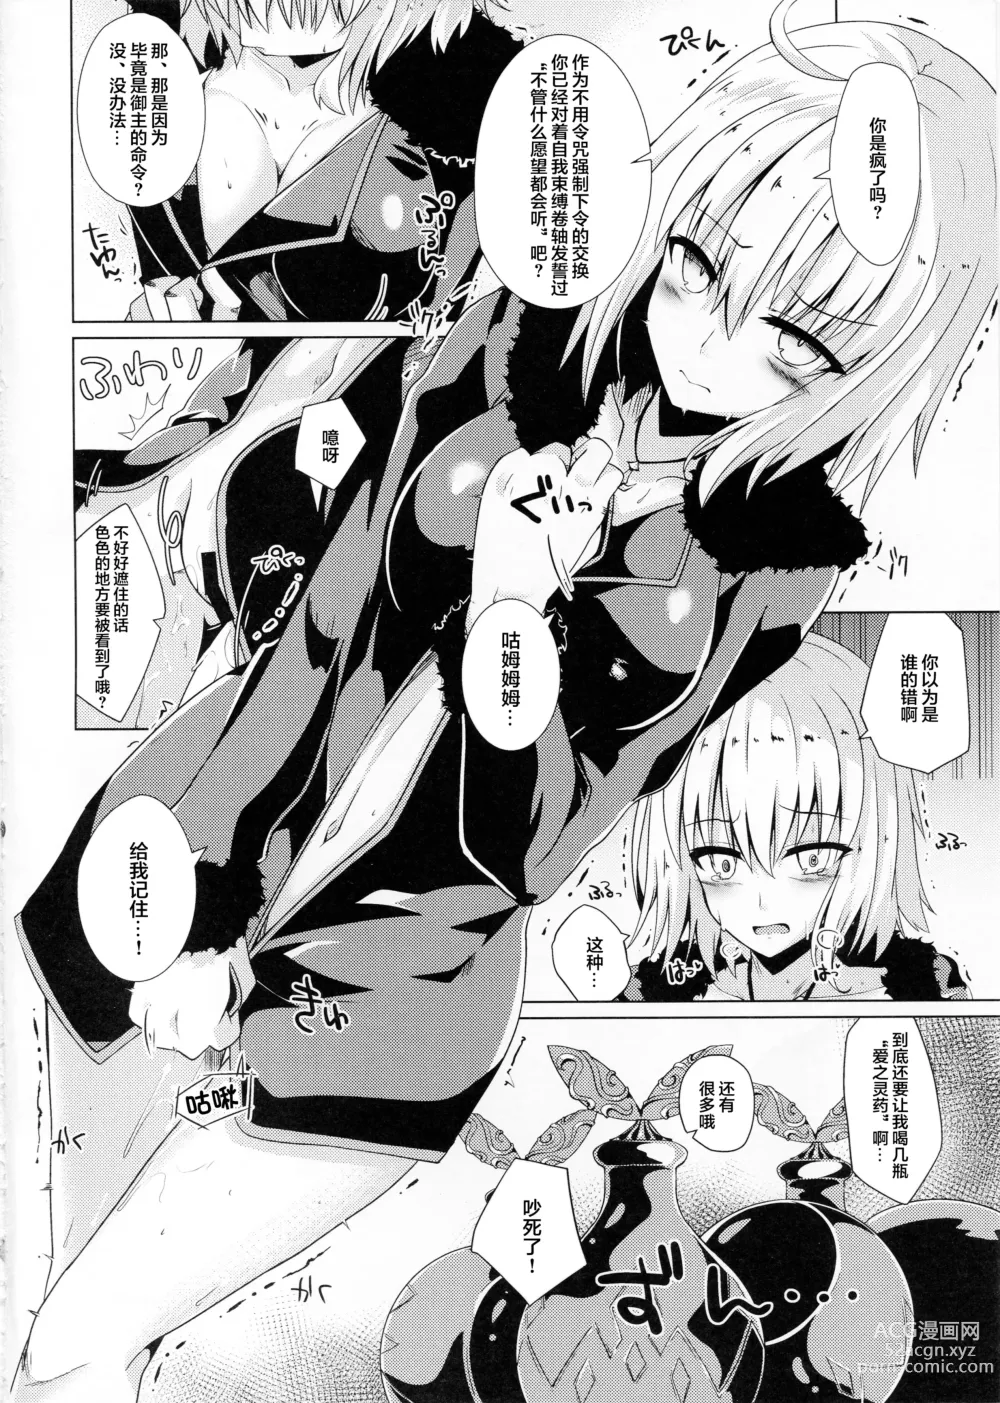 Page 3 of doujinshi Alter酱和爱之灵药和自我束缚卷轴